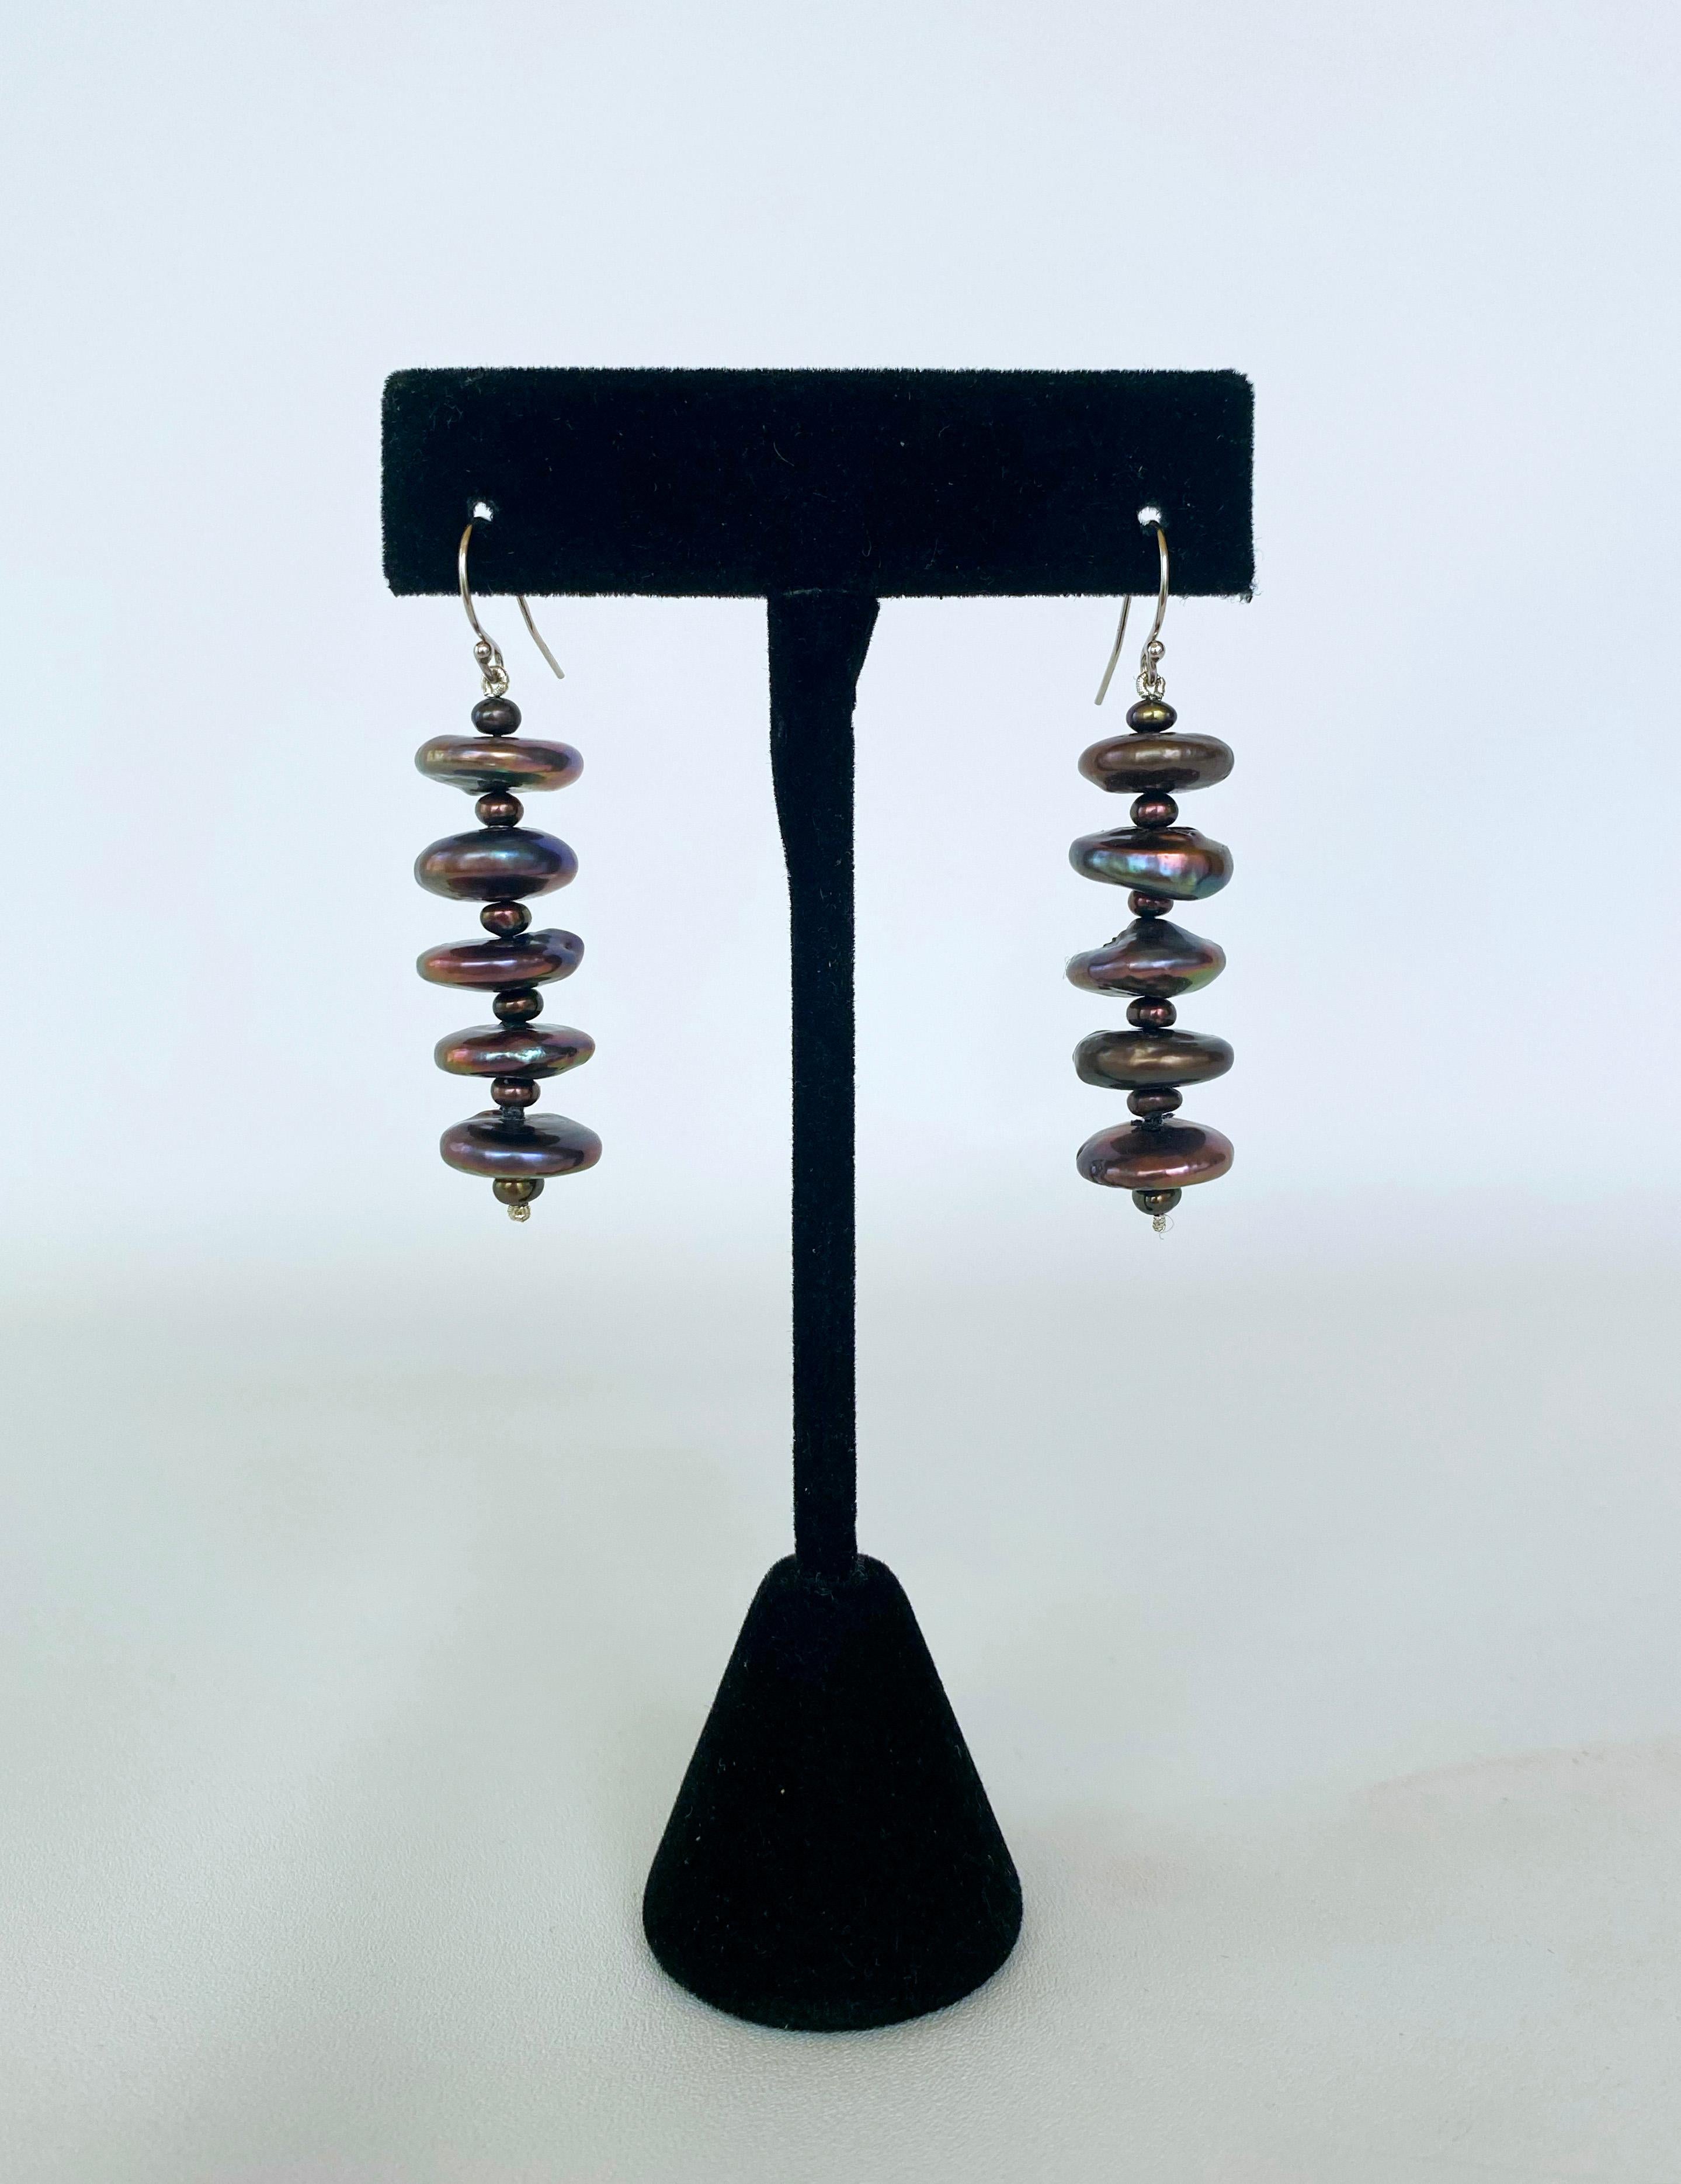 Beautiful yet simple flat Black Pearl earrings with small Black Pearl beads in between. This pair features Peacock / Oil spill Pearls that display a beautiful luster and sheen. Measuring a total of 2.25 inches long and hanging from a 14K White Gold